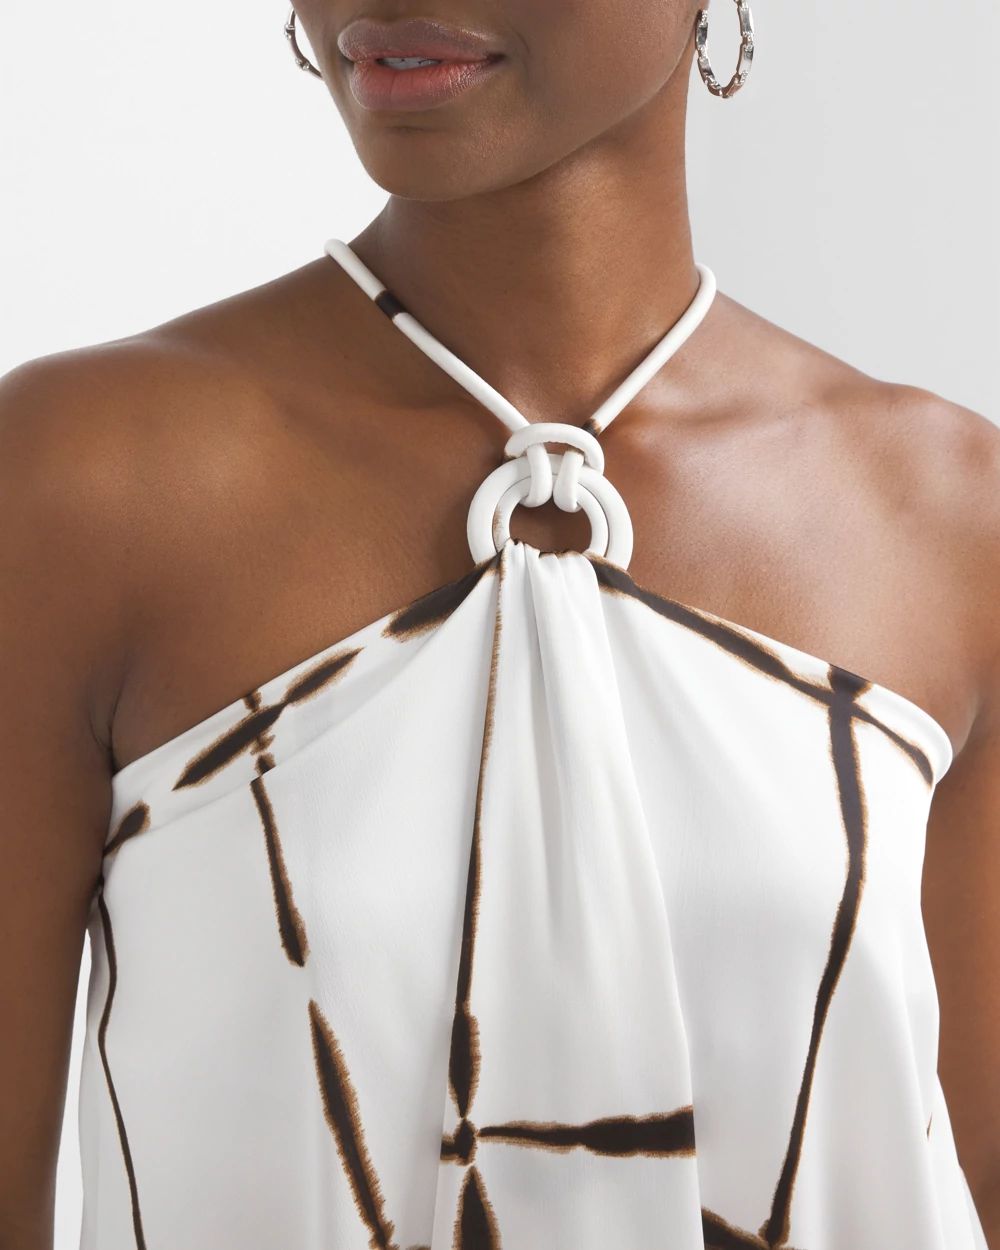 Ring Detail Halter Top click to view larger image.